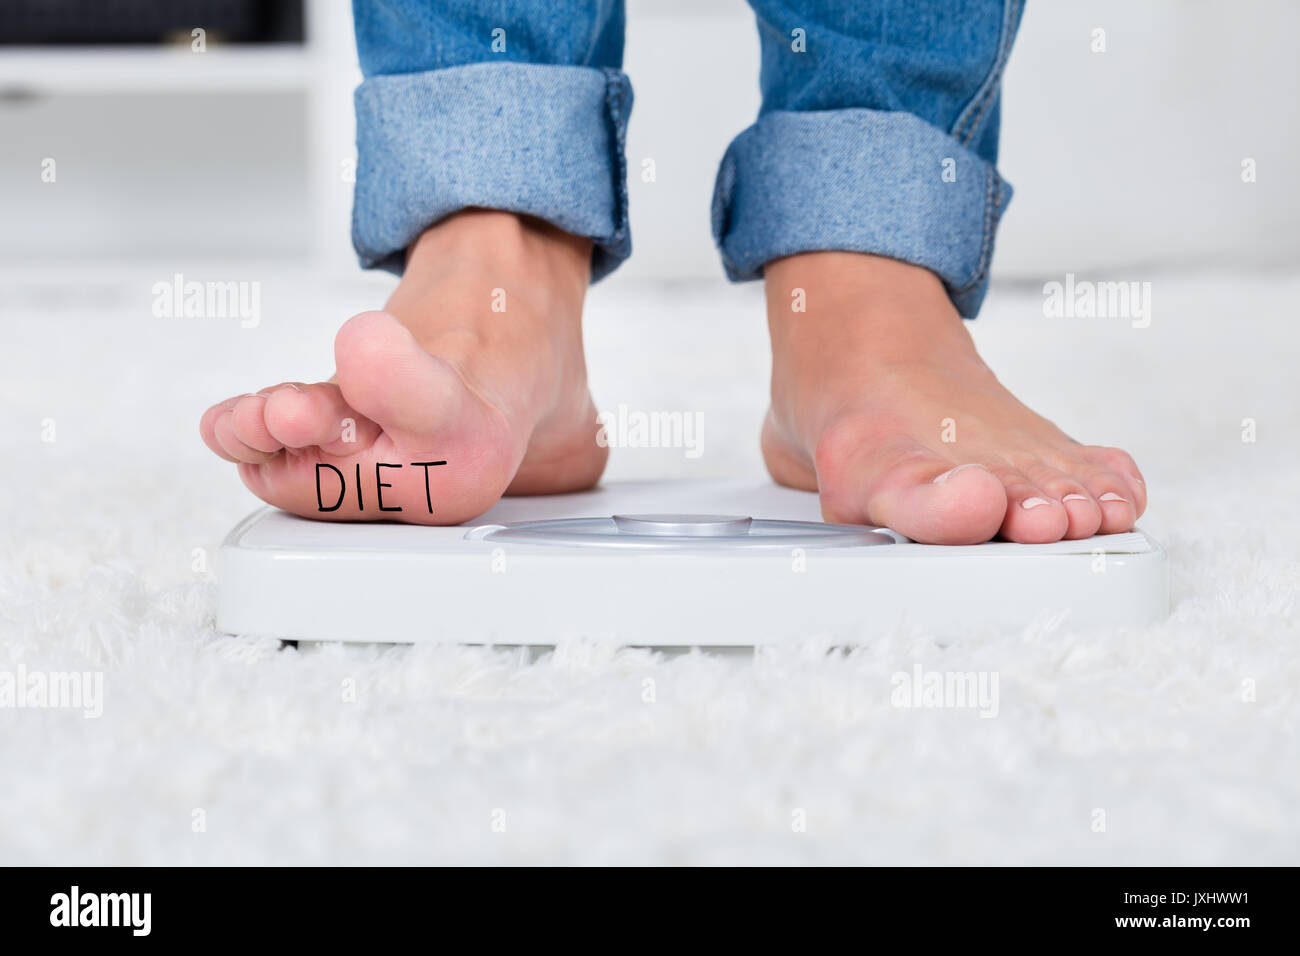 https://c8.alamy.com/comp/JXHWW1/close-up-of-person-feet-standing-on-weighing-scale-showing-diet-text-JXHWW1.jpg